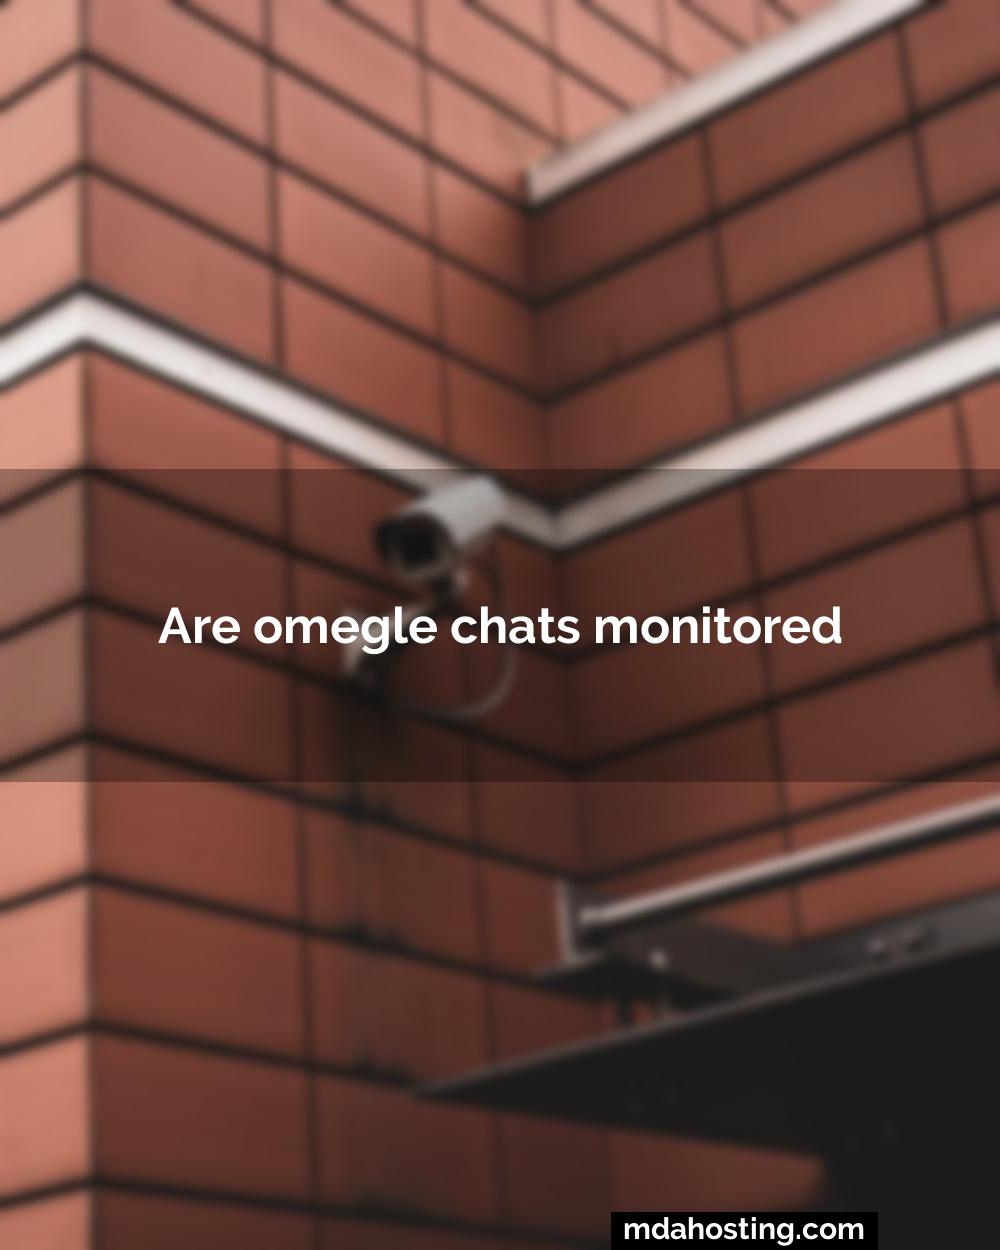 Are omegle chats monitored